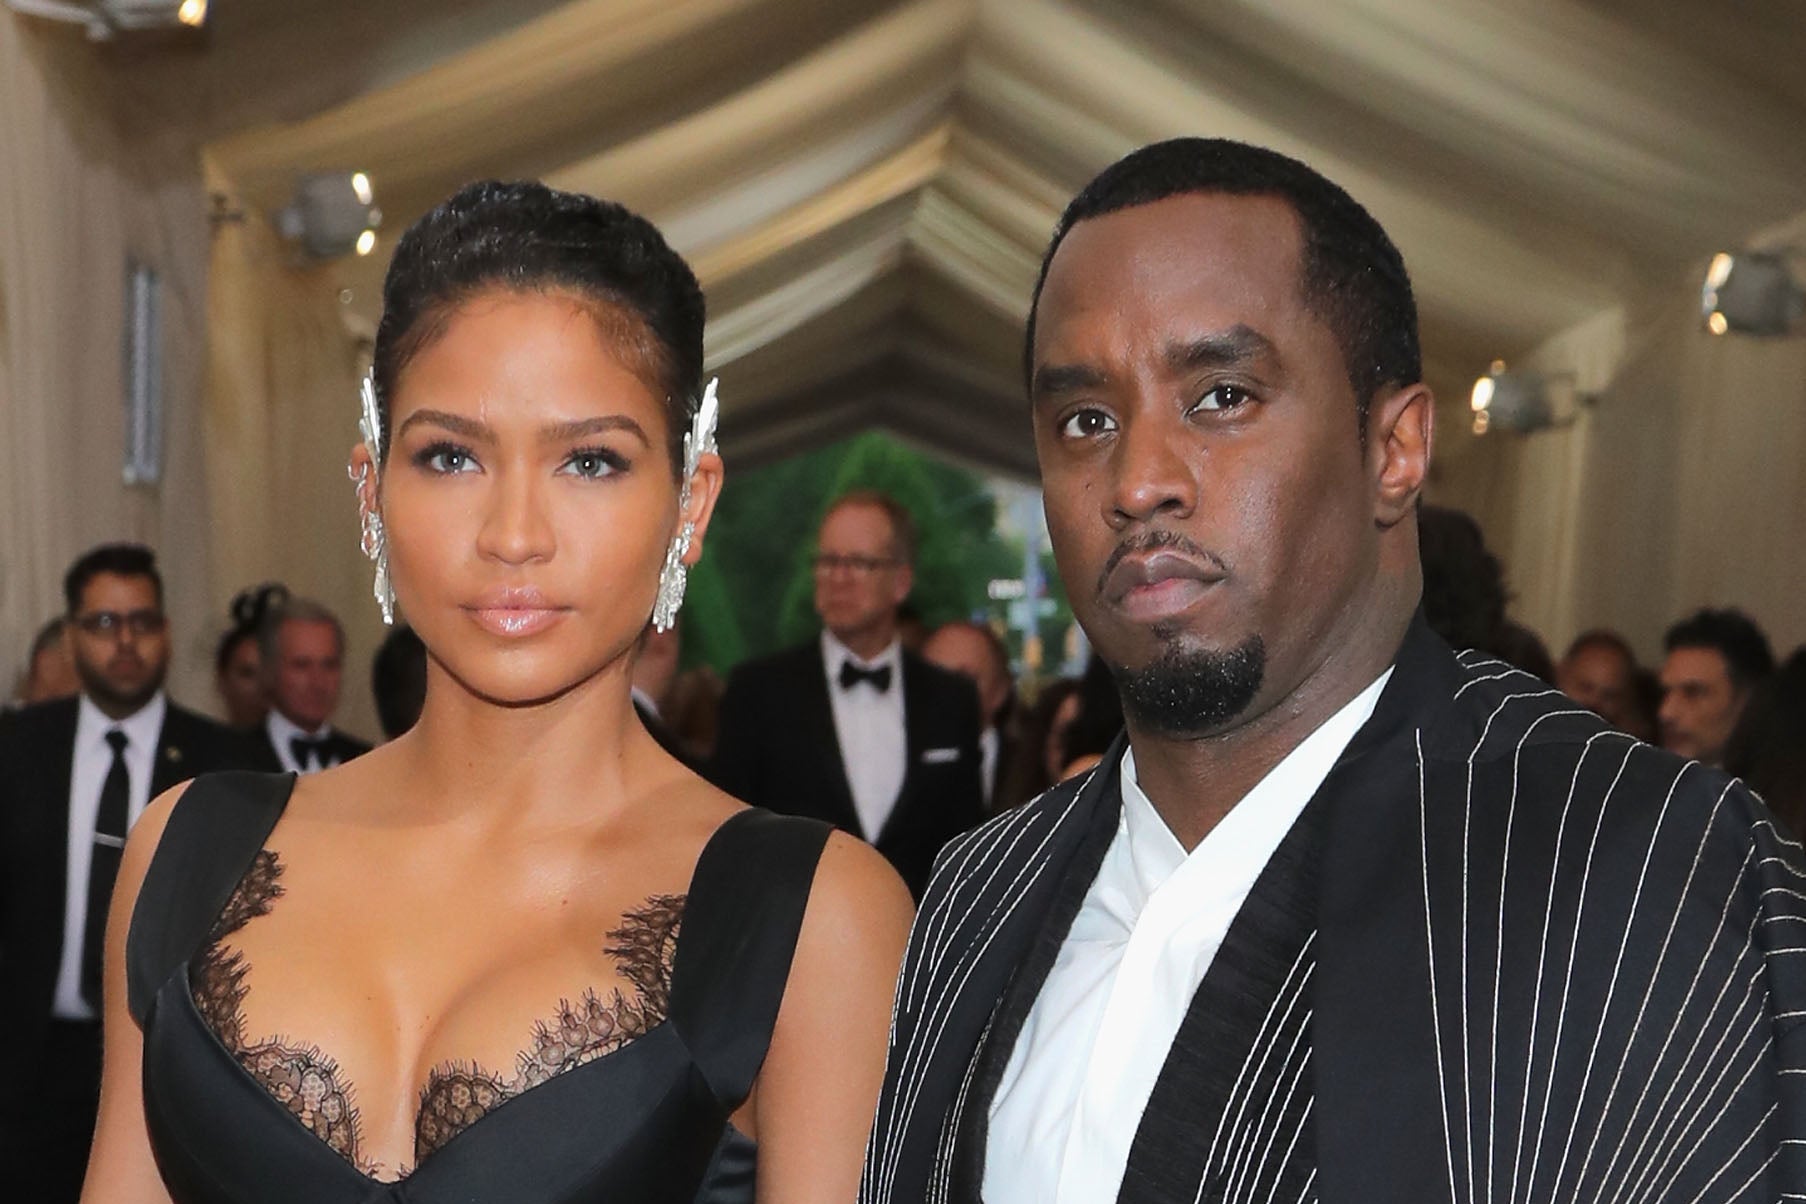 <p>The new lawsuit comes one week after Mr Combs was accused of rape and repeated physical abuse by his ex-partner, R&B singer Cassie</p>